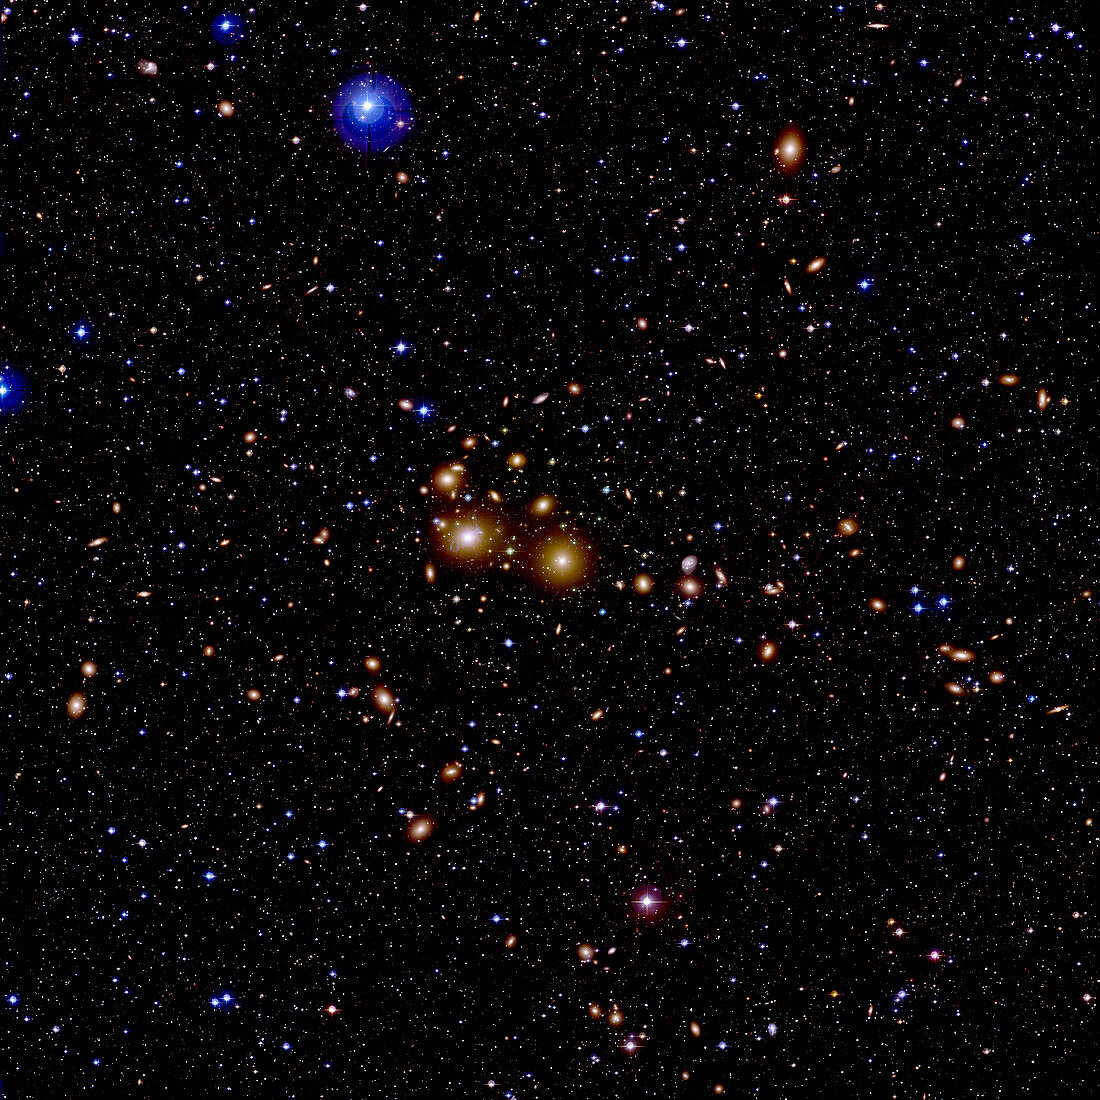 Perseus galaxy cluster (Abell 426)